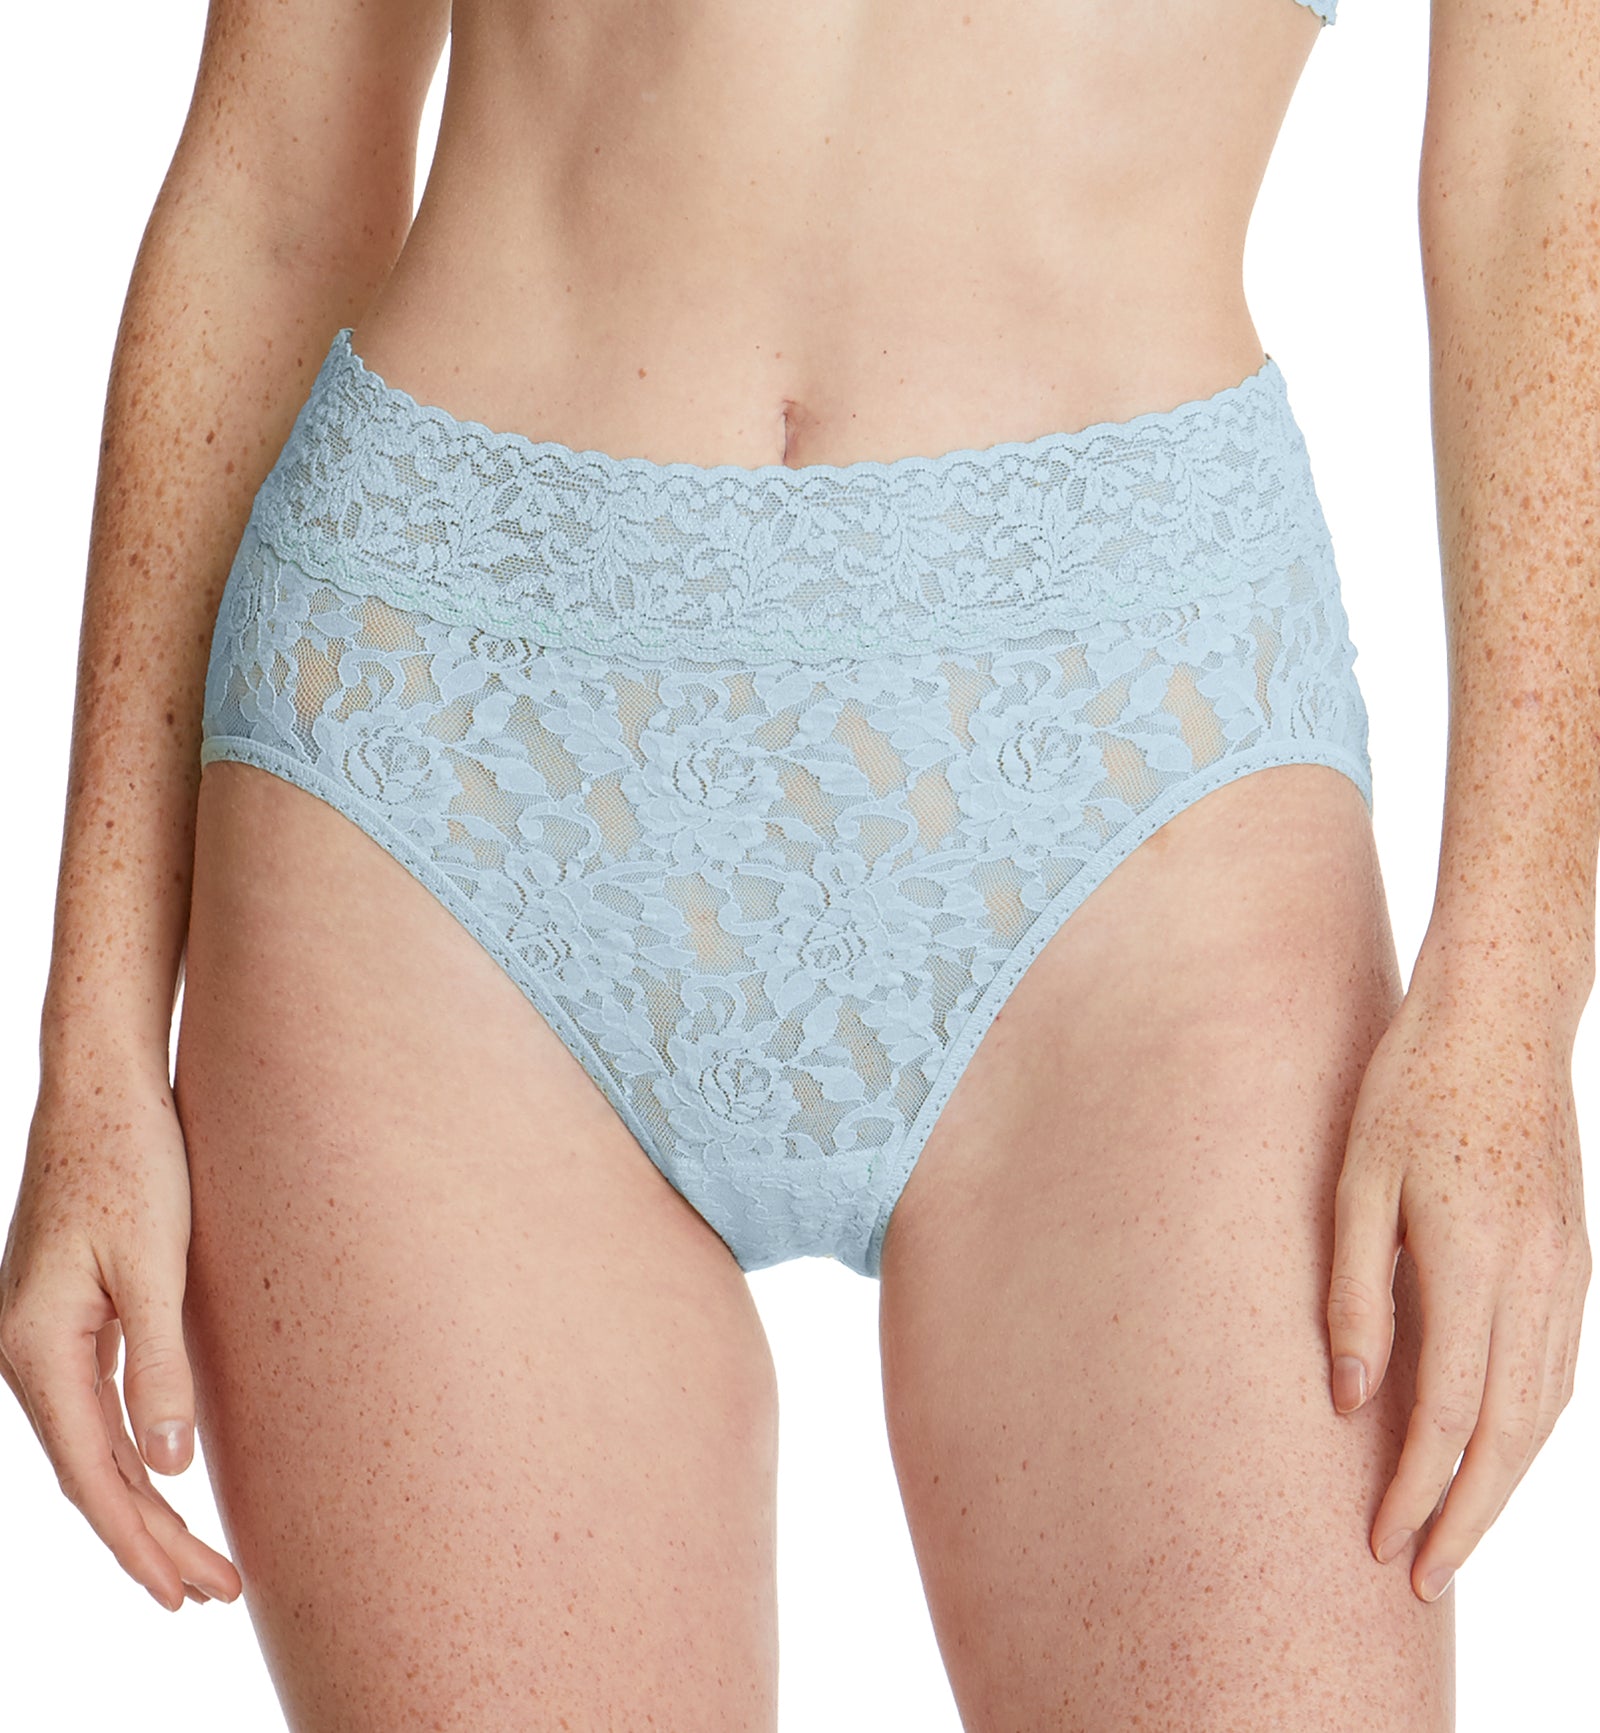 Hanky Panky Signature Lace French Brief (461),Small,Partly Cloudy - Partly Cloudy,Small